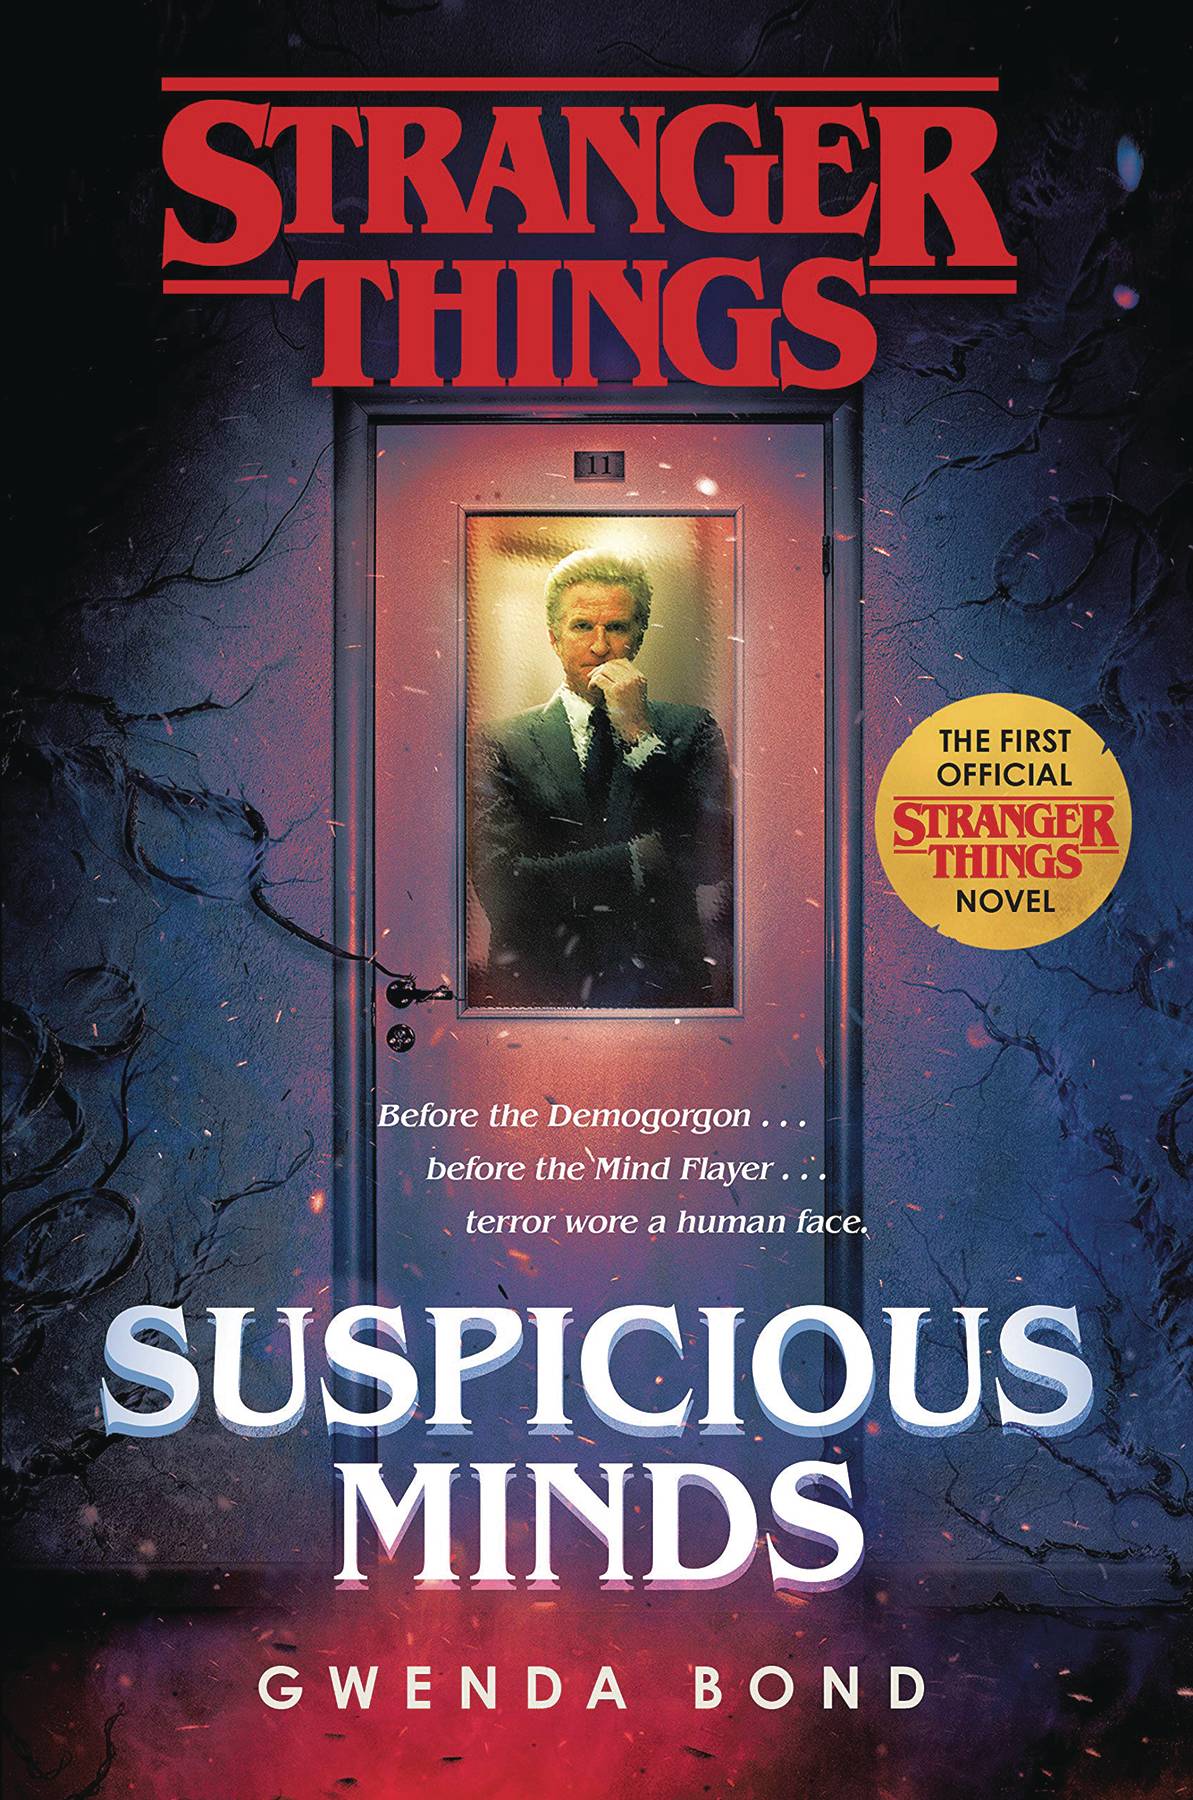 Stranger Things Soft Cover Novel Suspicious Minds